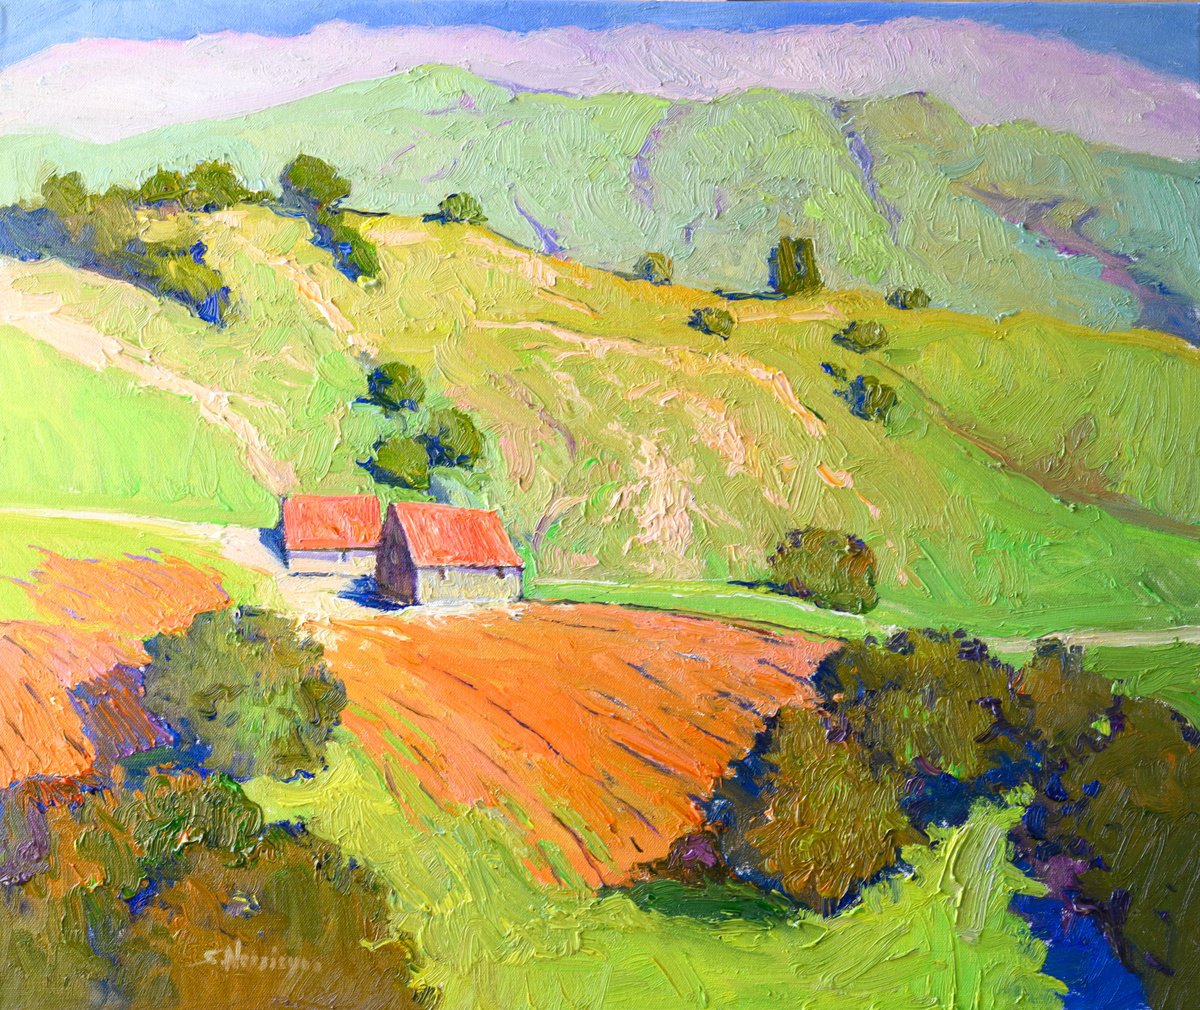 Farm in the Mountains, Green HIlls by Suren Nersisyan